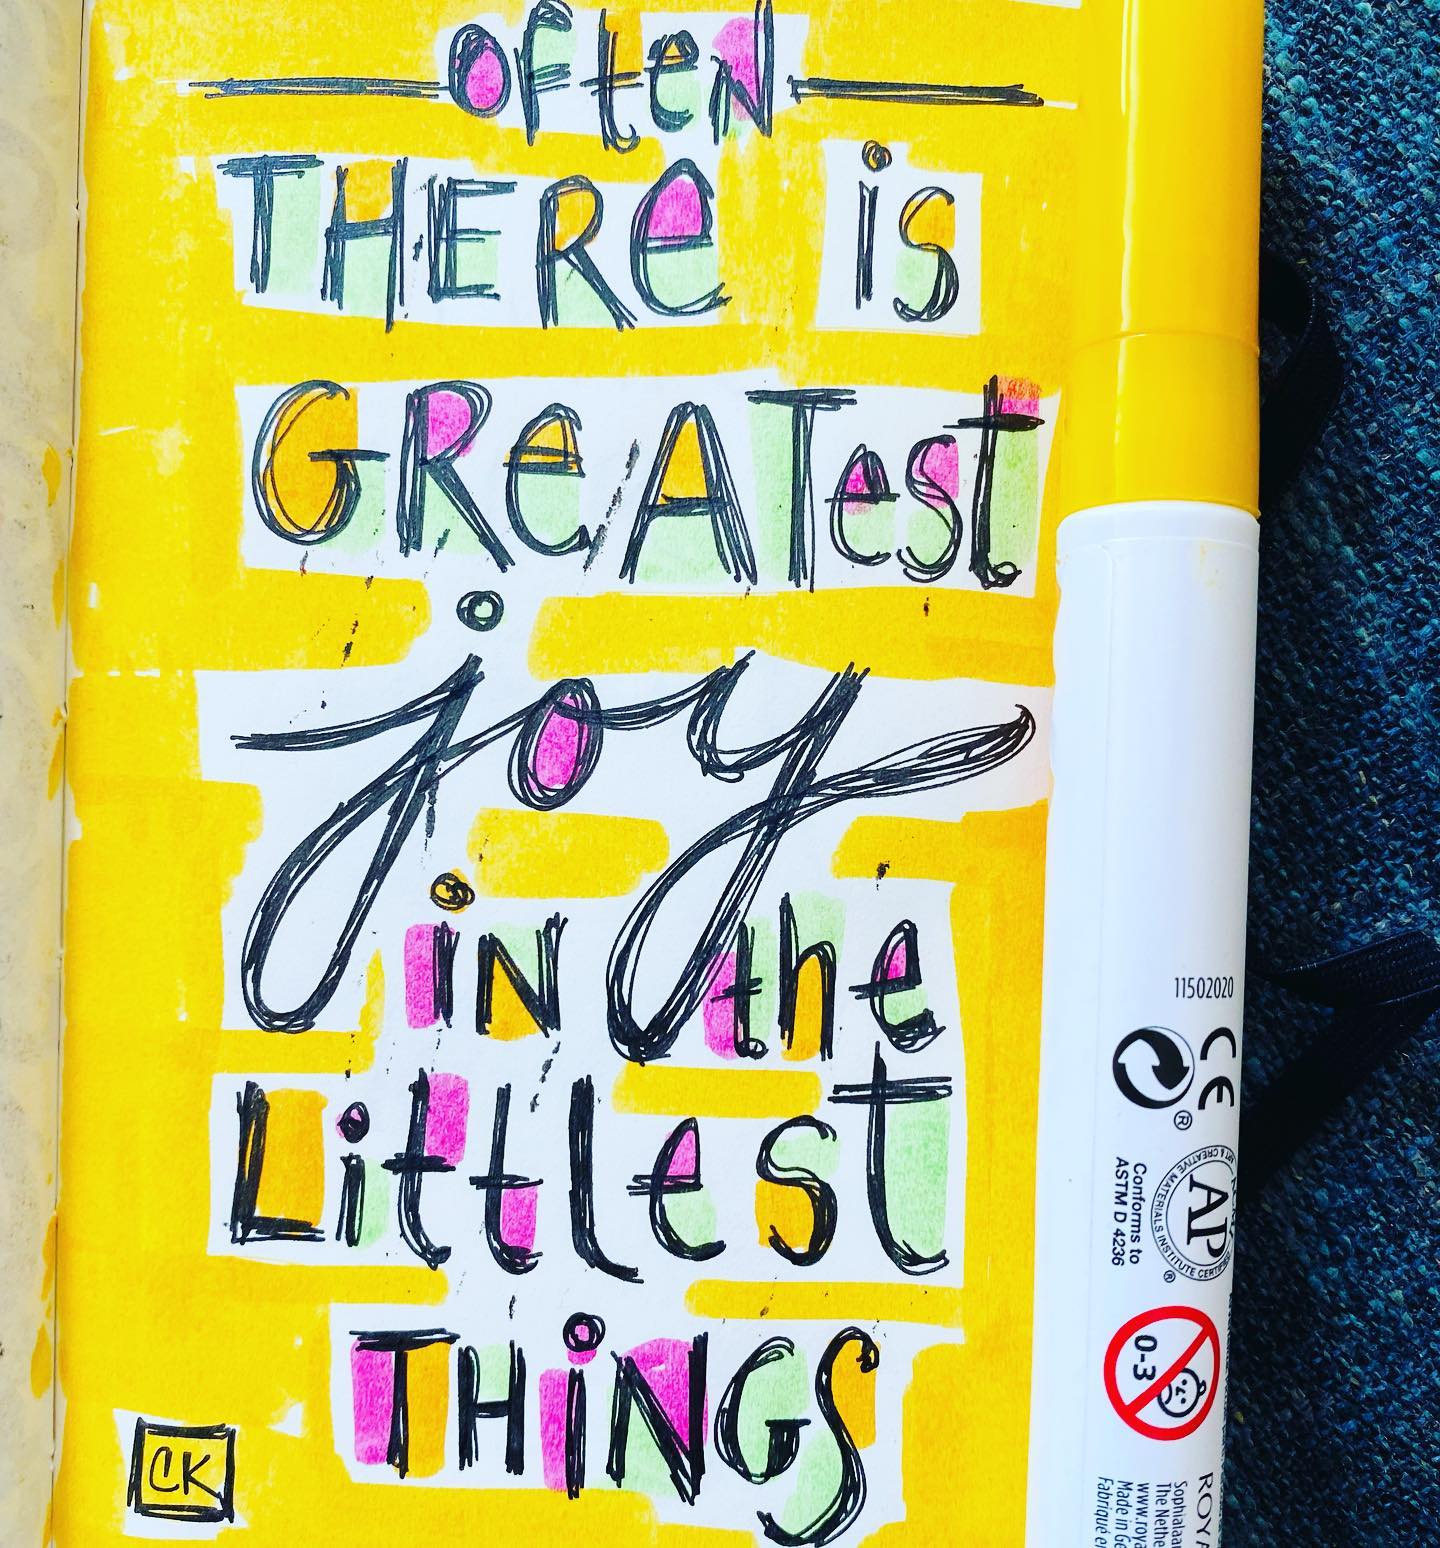 Hope you find joy in the little things today!